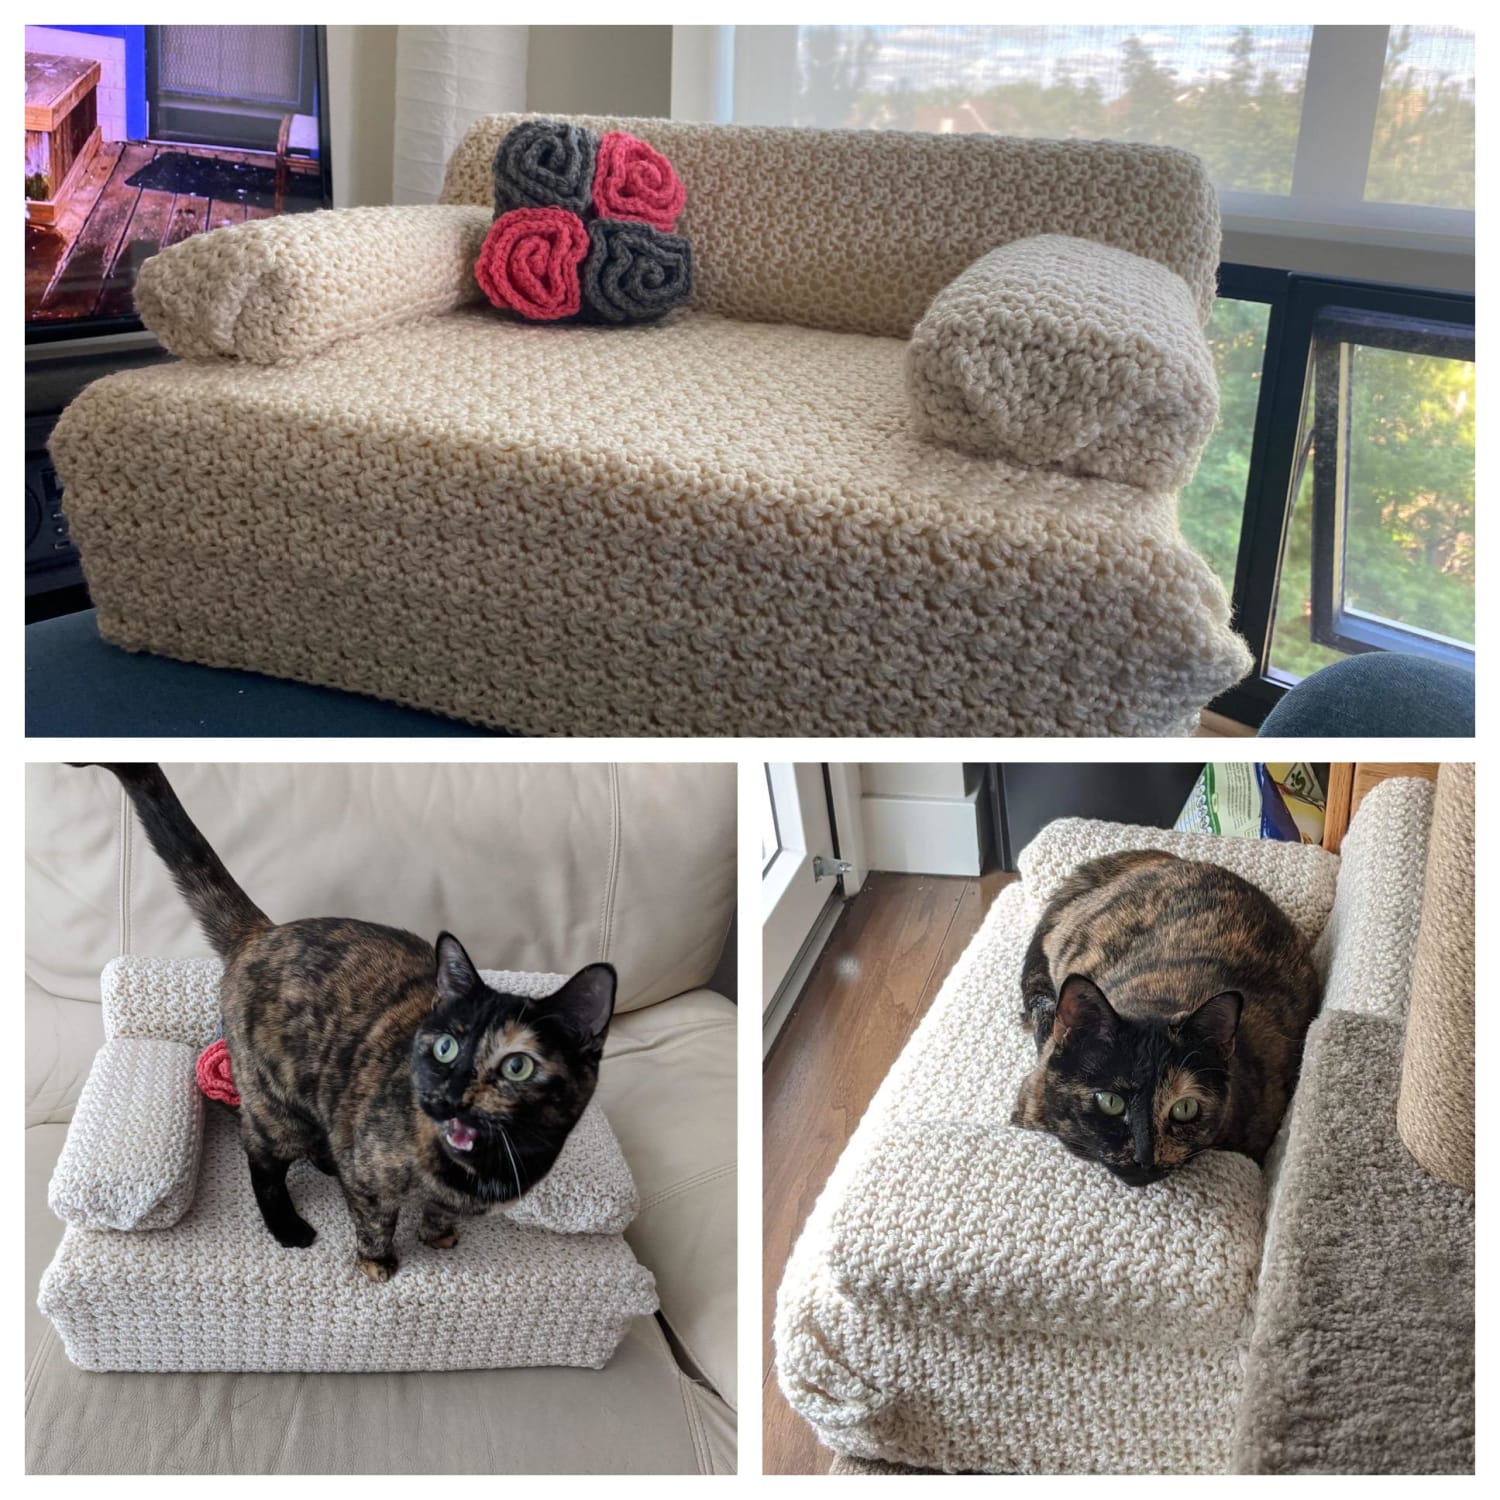 I made a cat-couch to match my daughter's couch. Hazel the cat likes it!